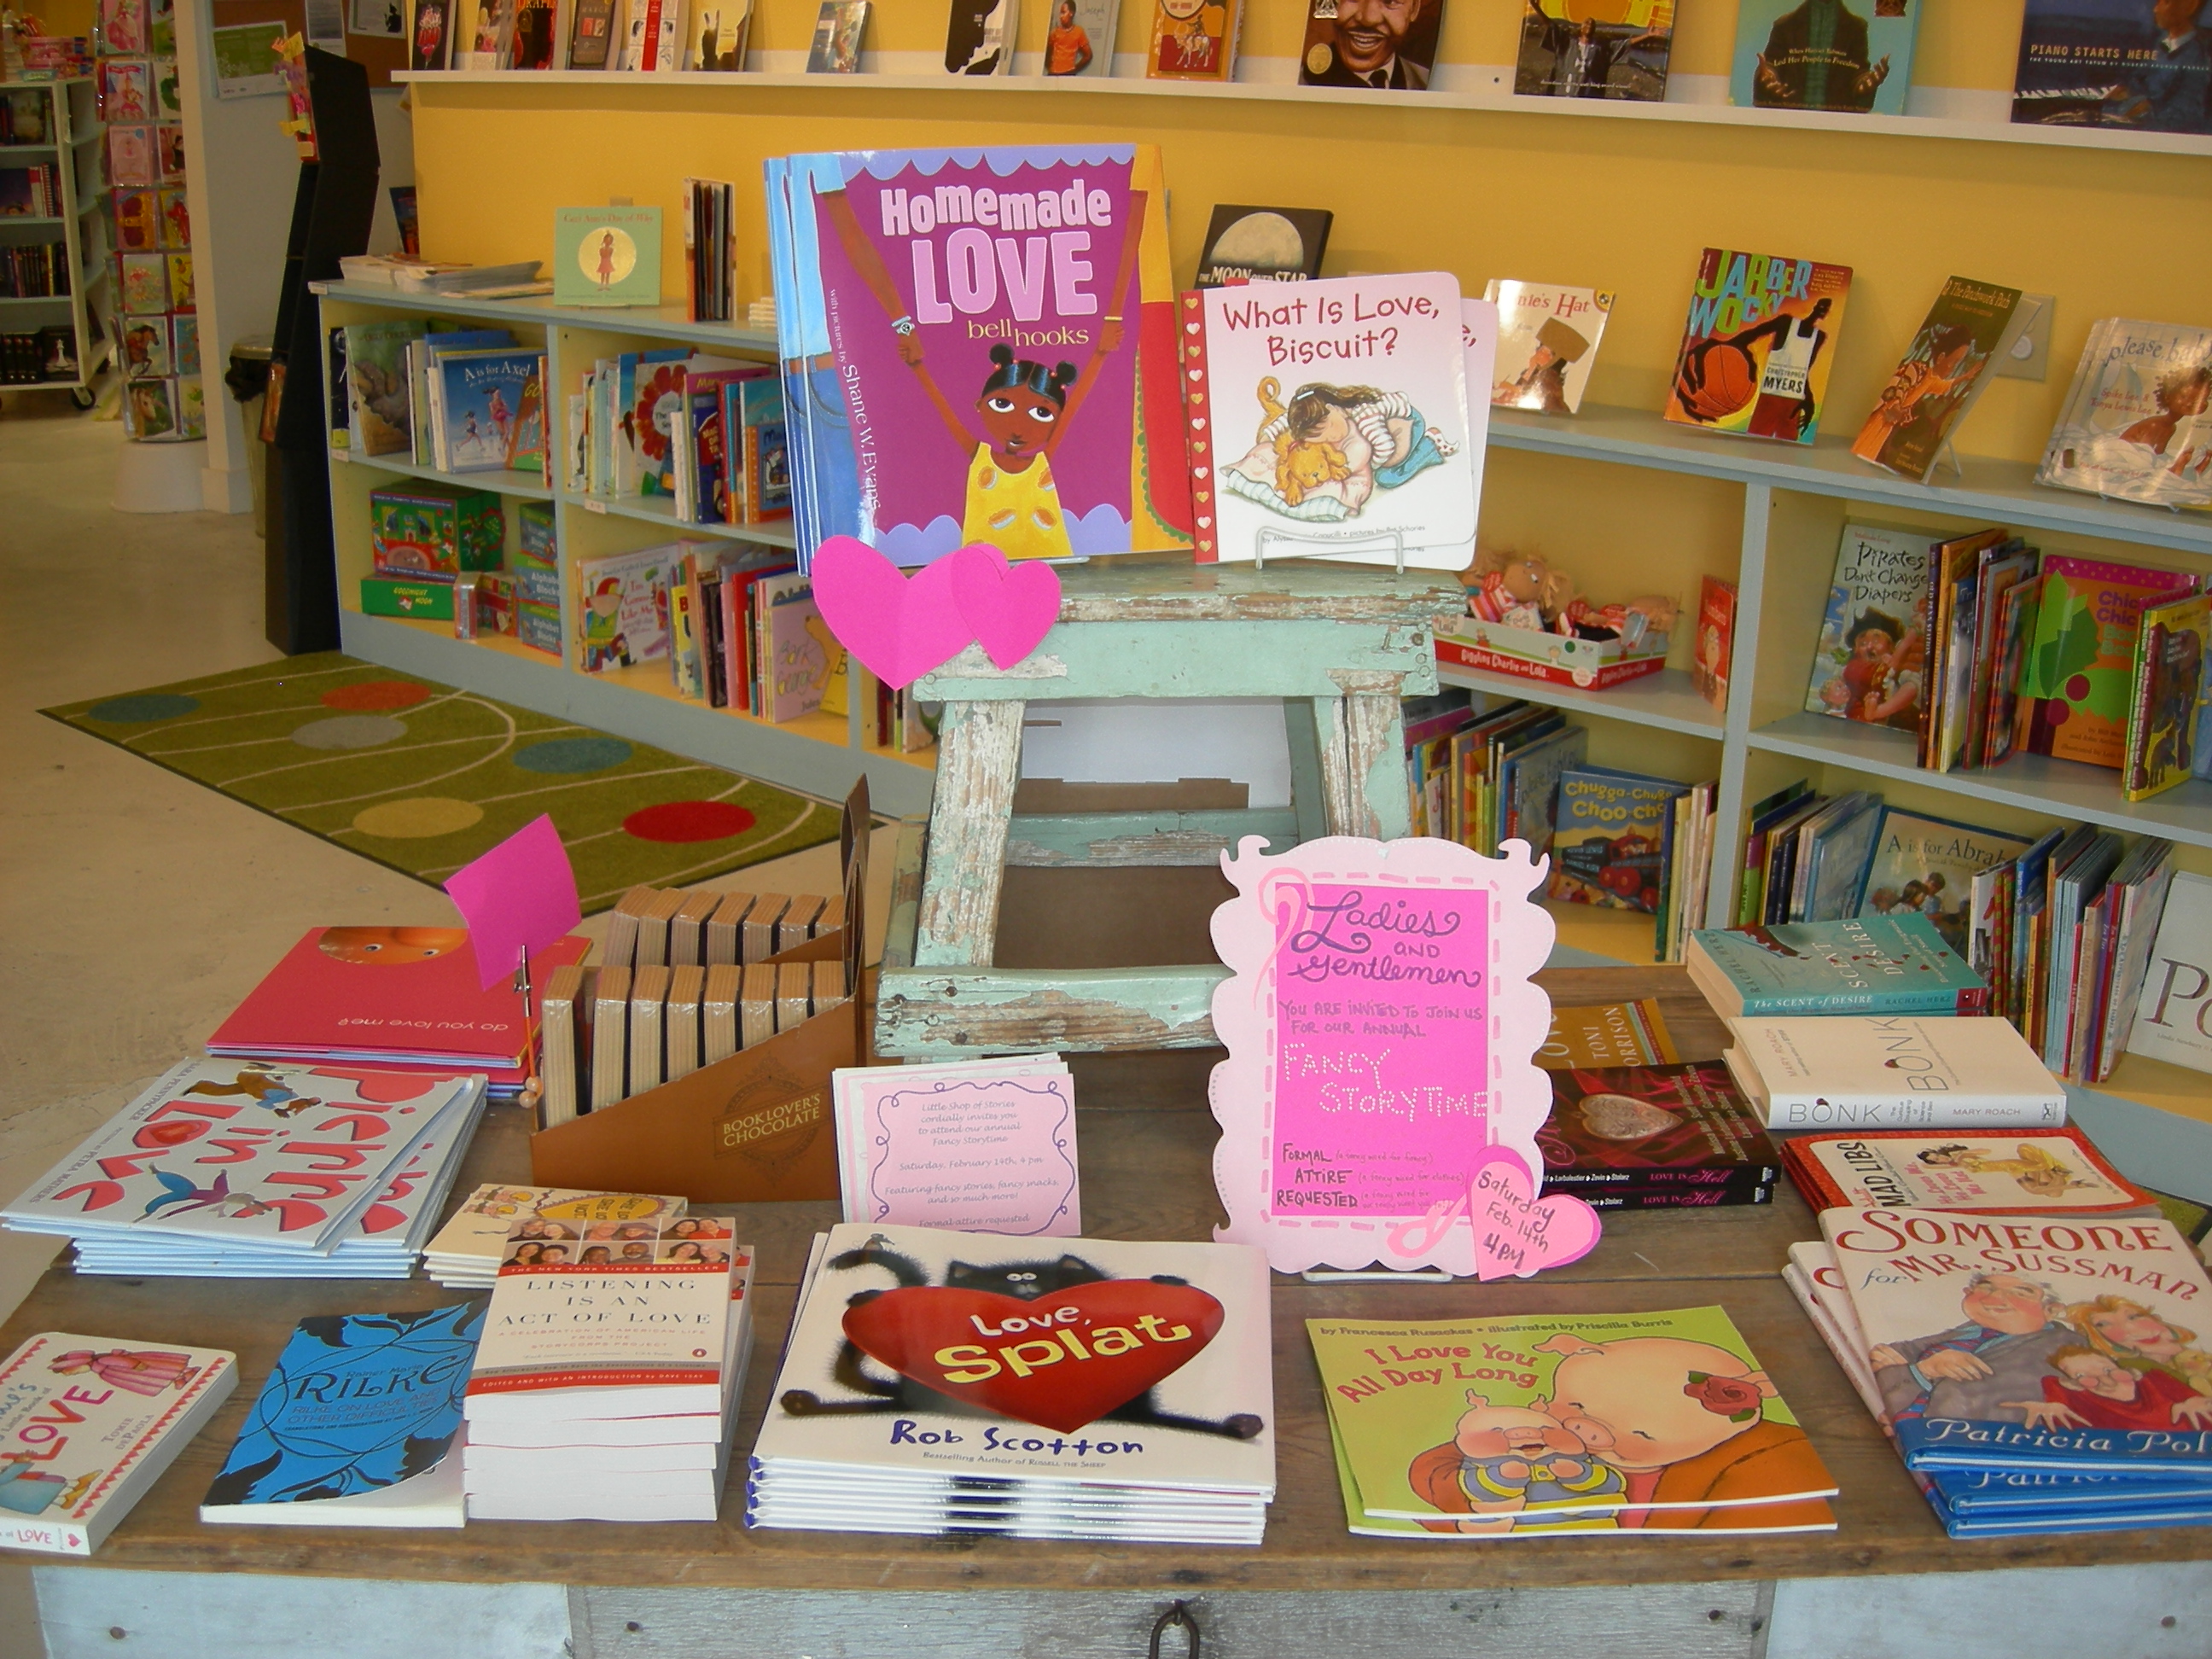 Little Shop of Stories had a good selection of Valentine-themed books for the child in all of us!